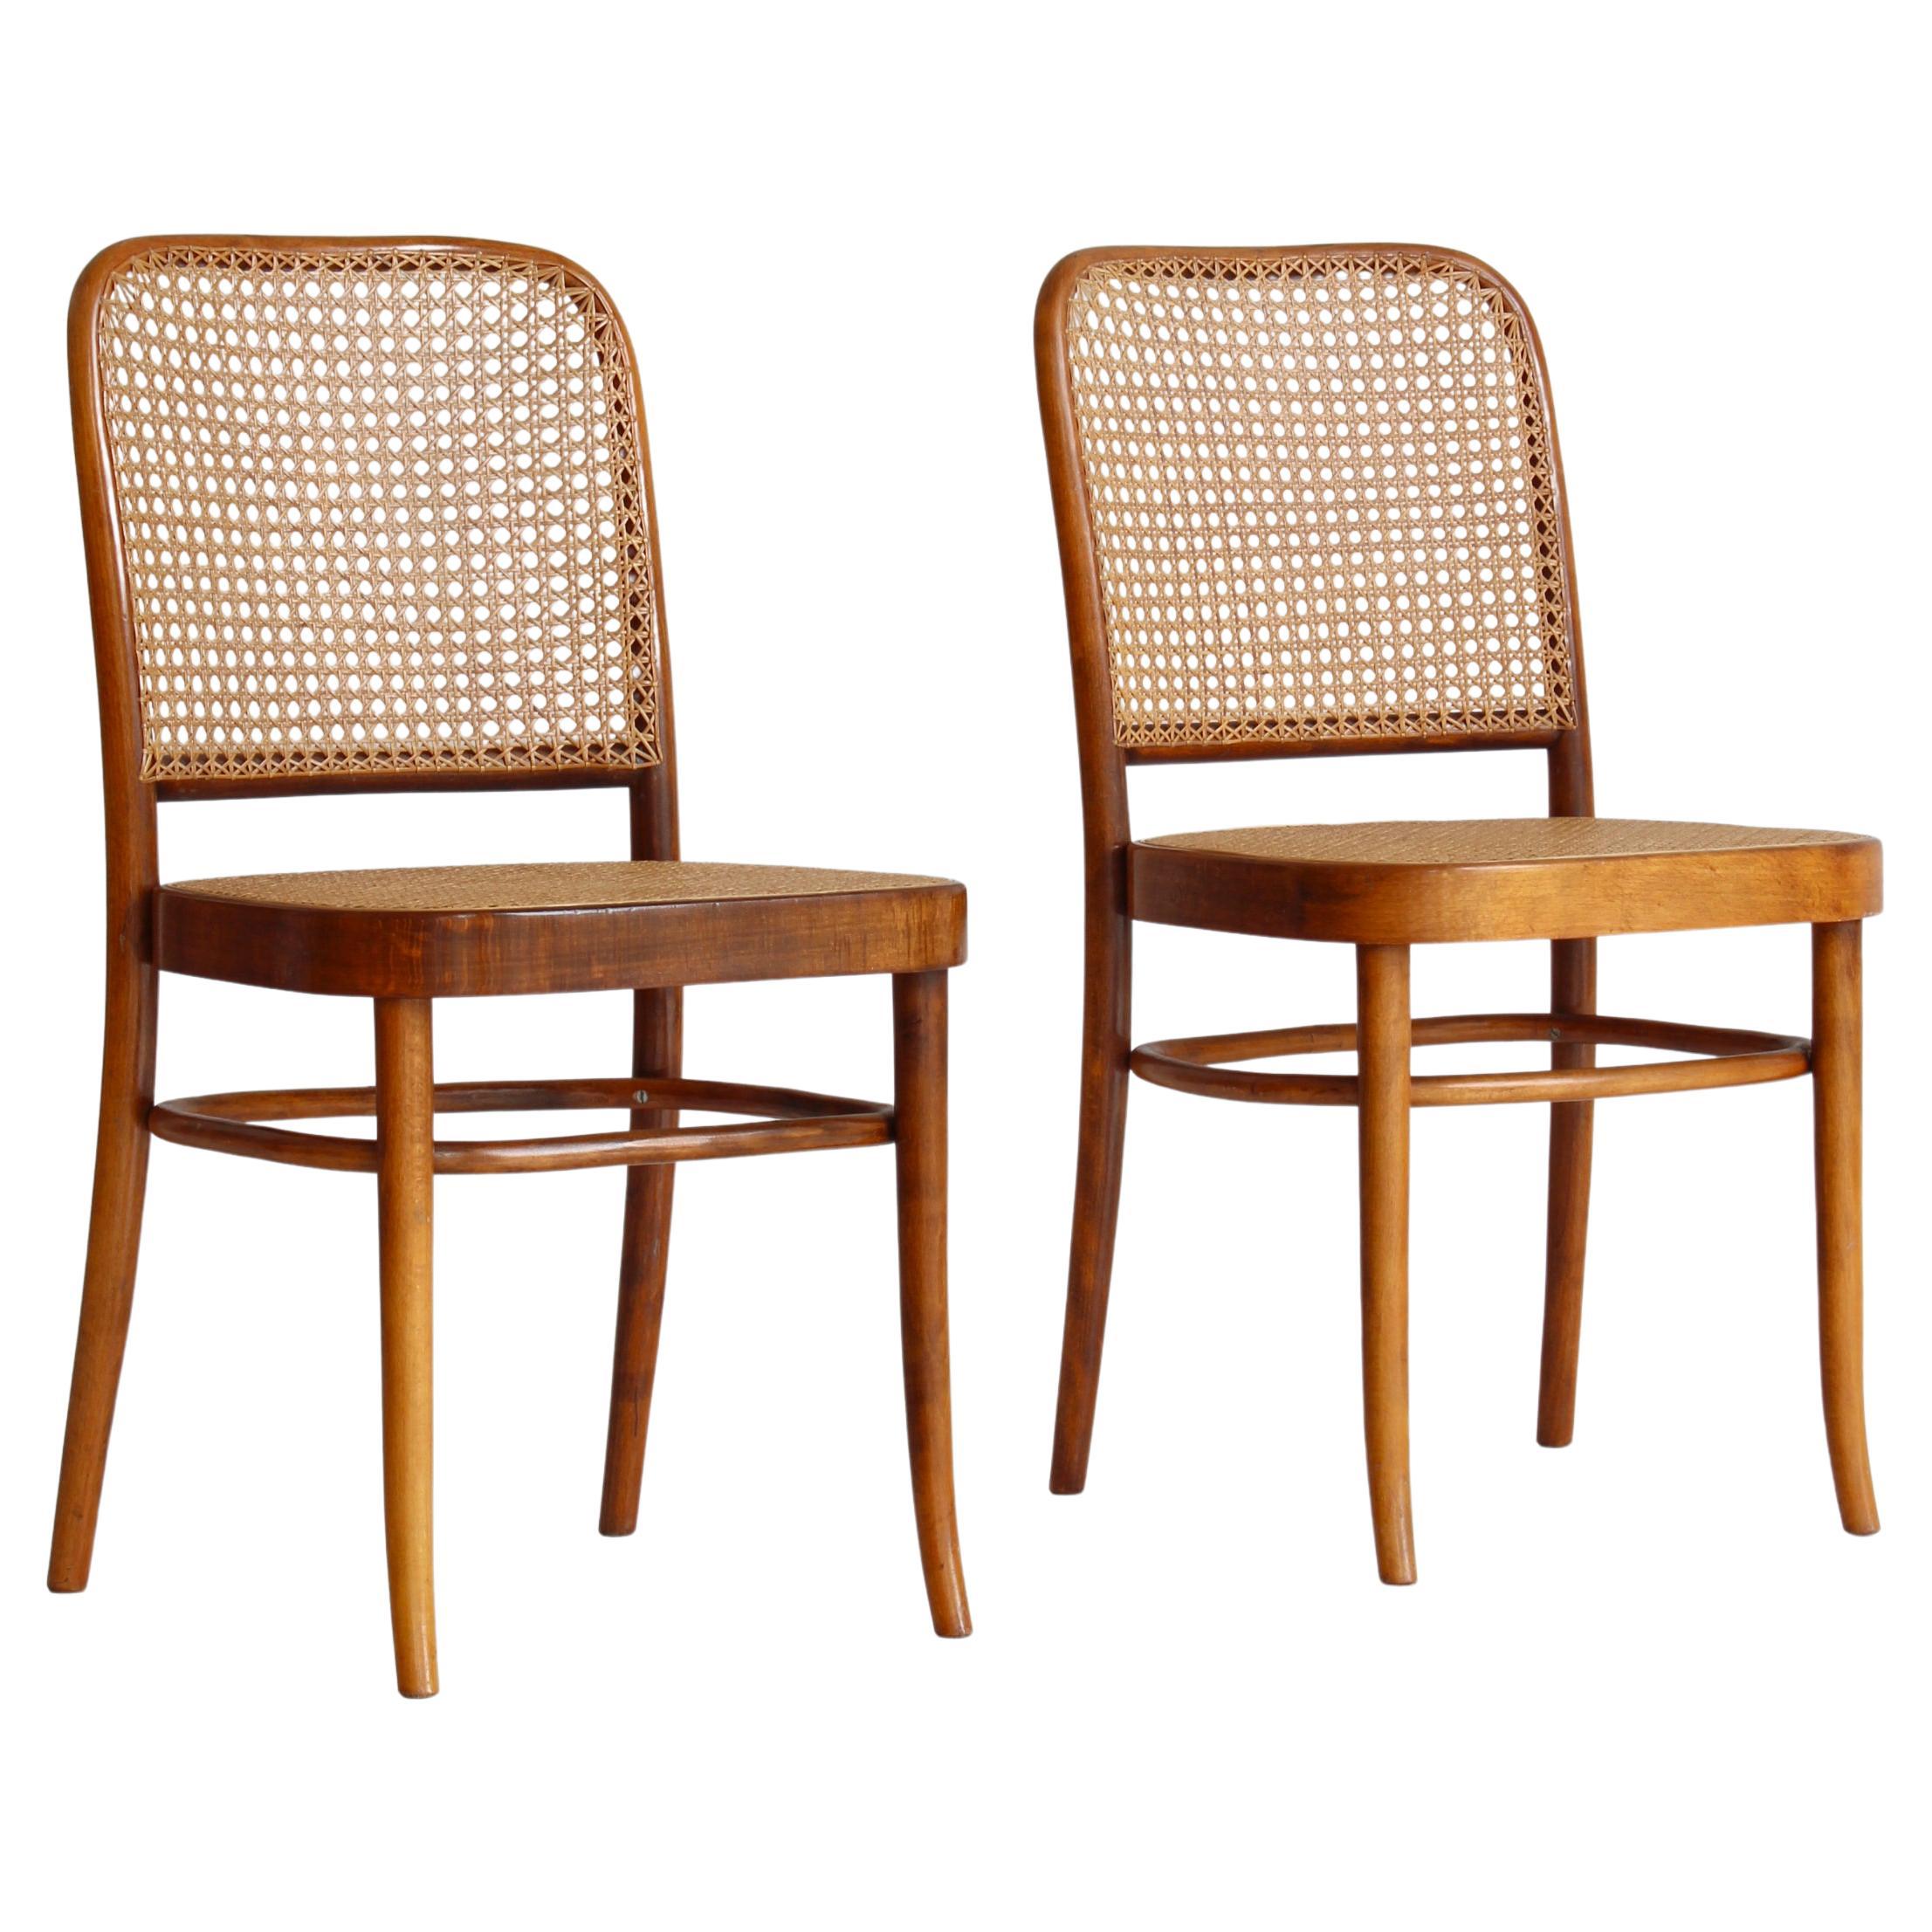 Fritz Hansen Thonet 811 Chair by Josef Hoffmann in Bentwood and Cane, 1930s